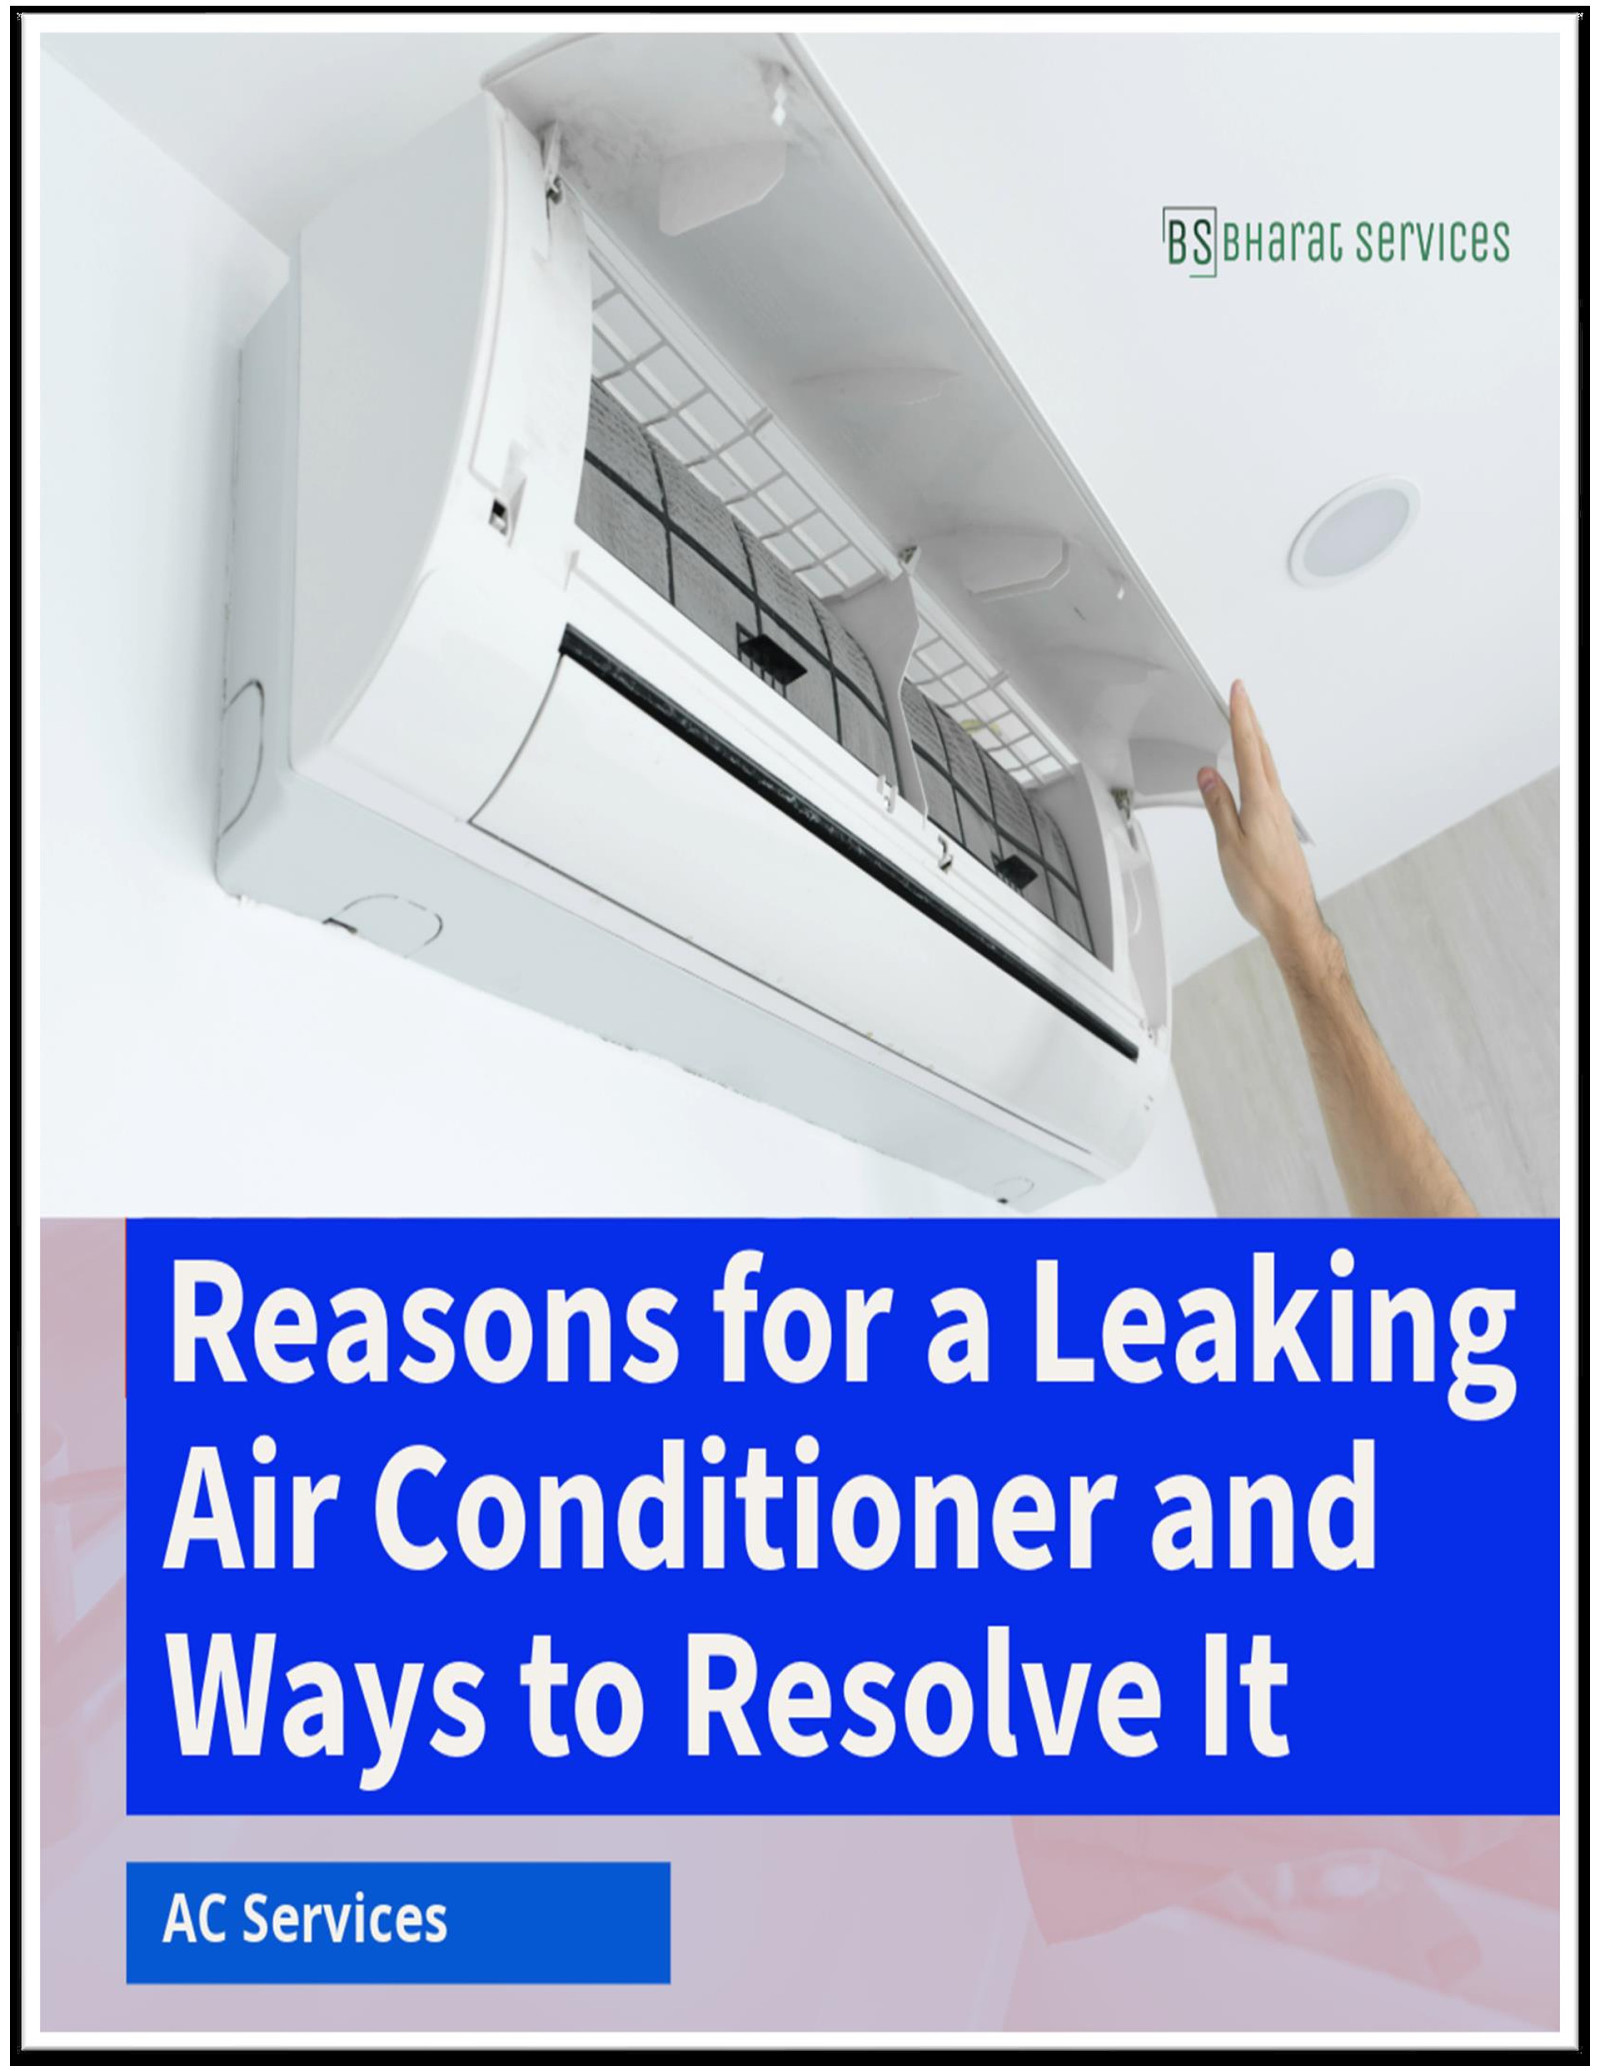 Reasons for a Leaking Air Conditioner and Ways to Resolve It